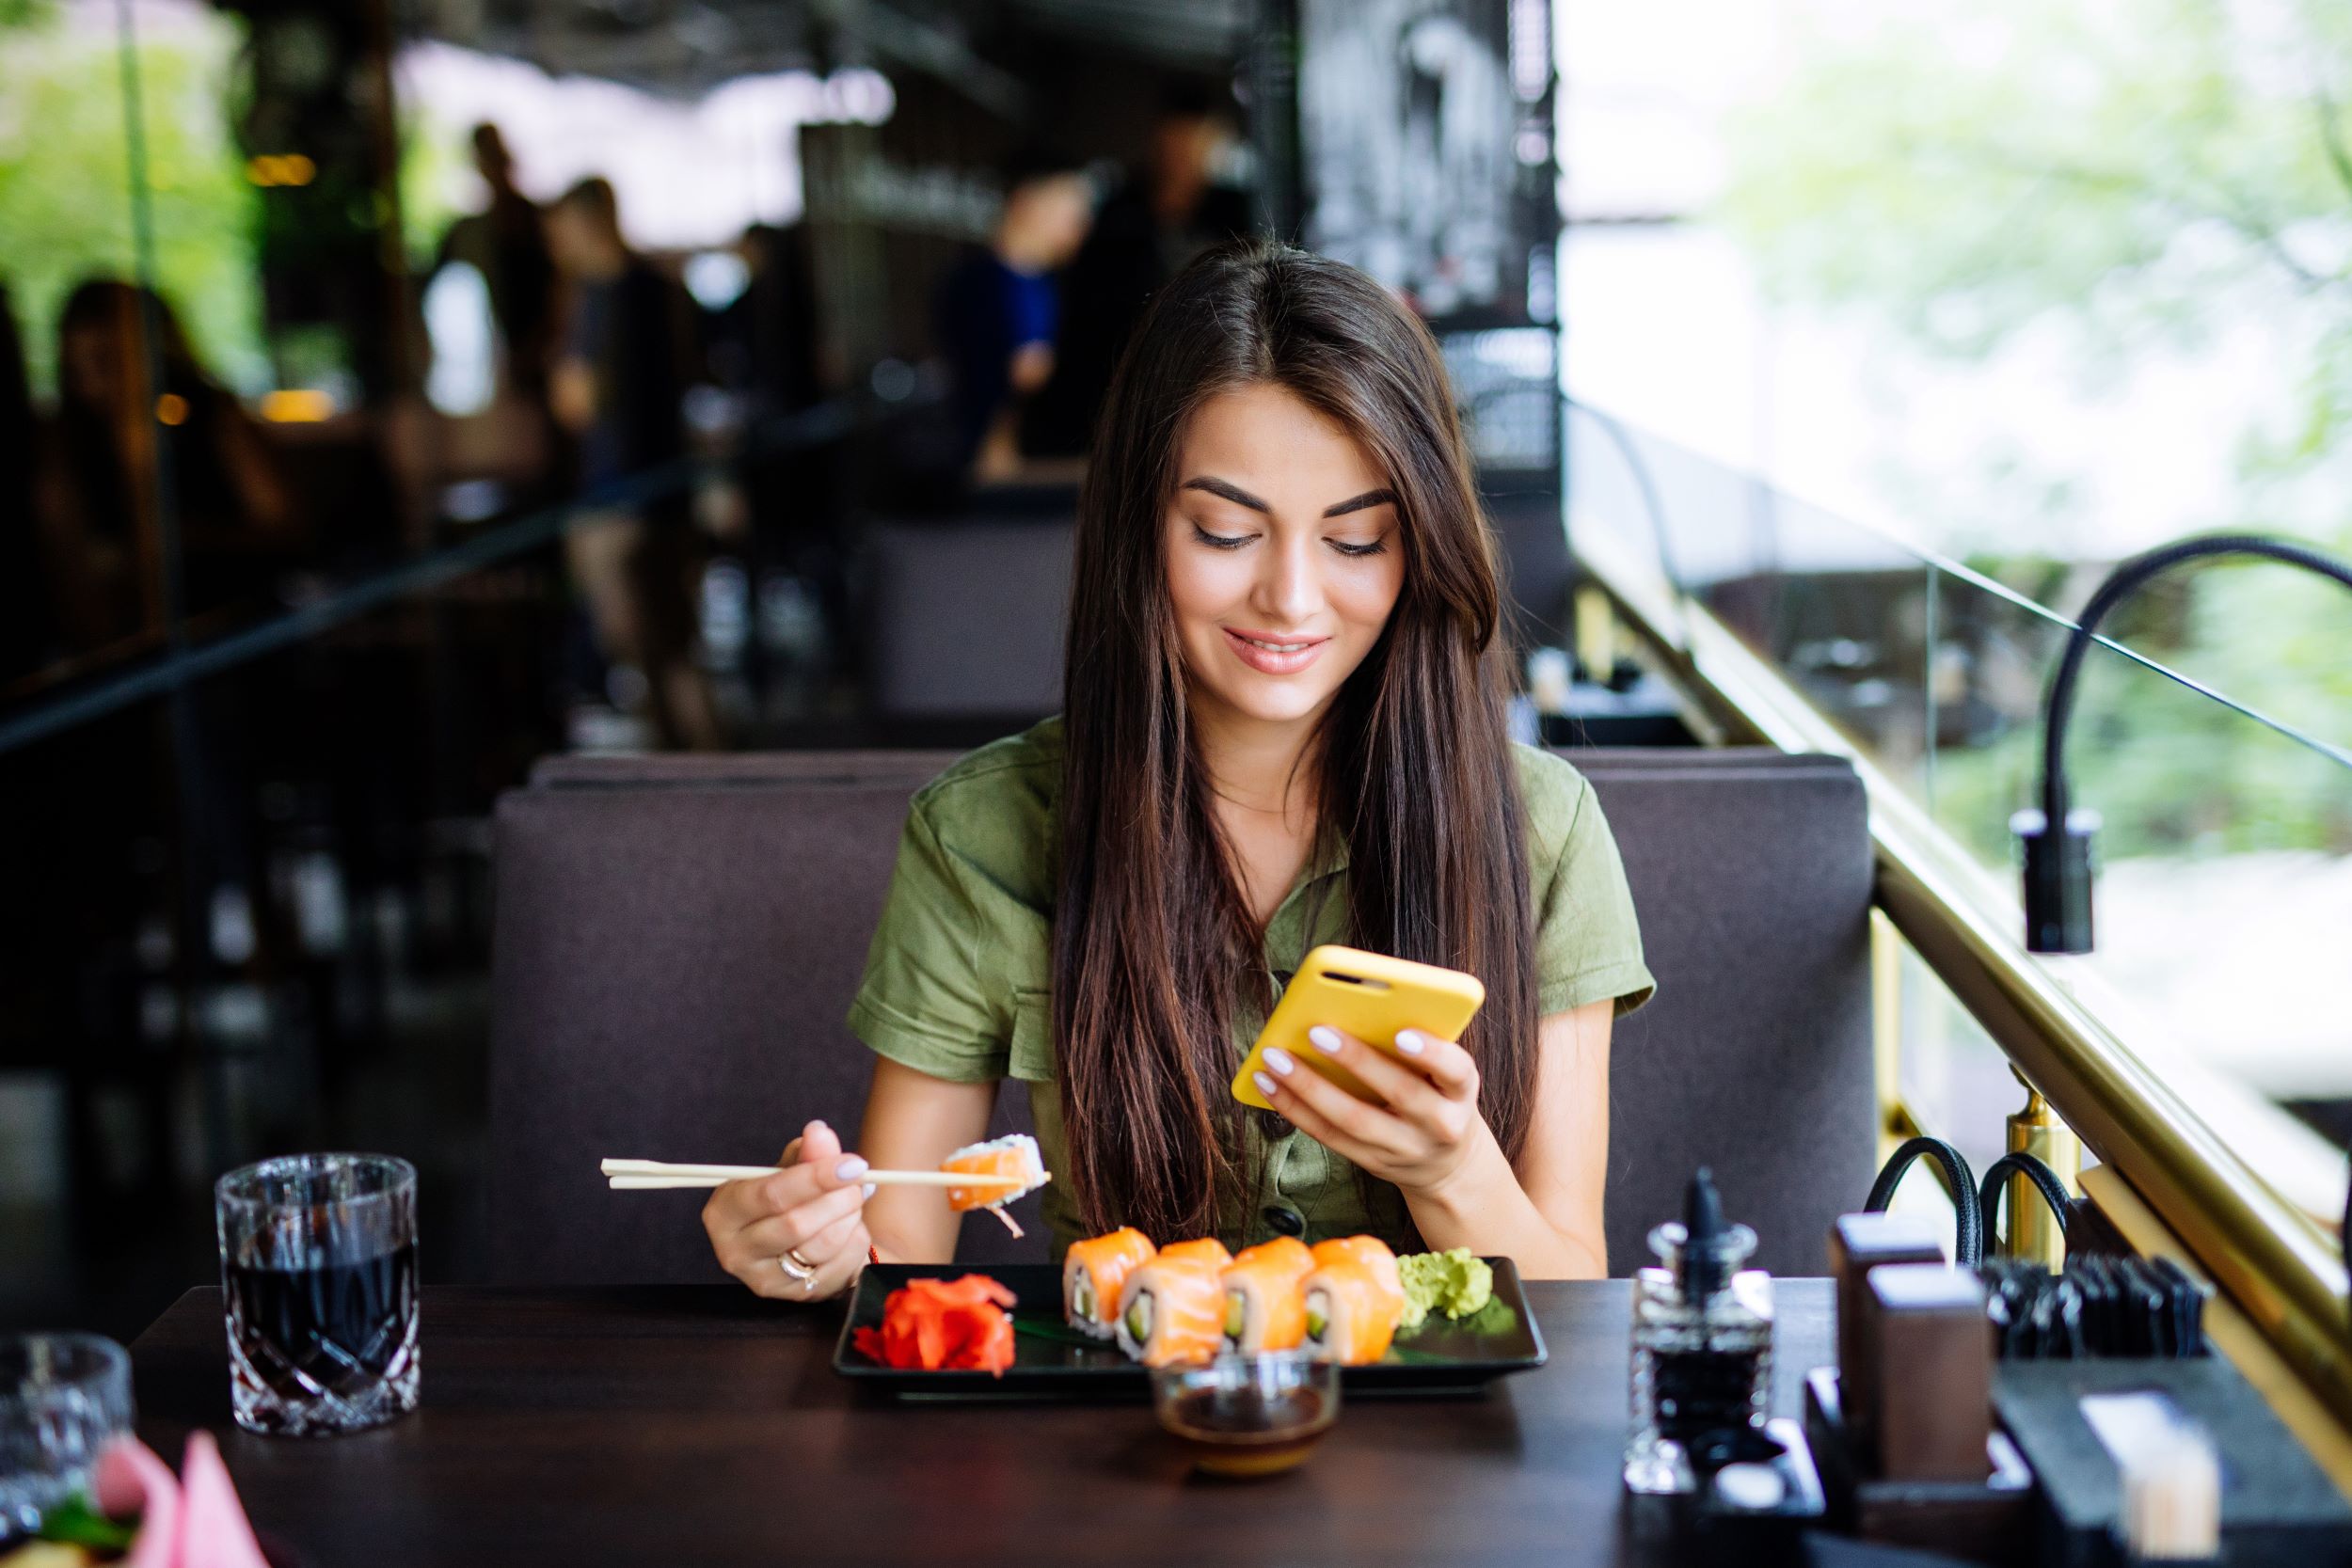 A woman eating sushi in a restaurant and browsing on her phone.